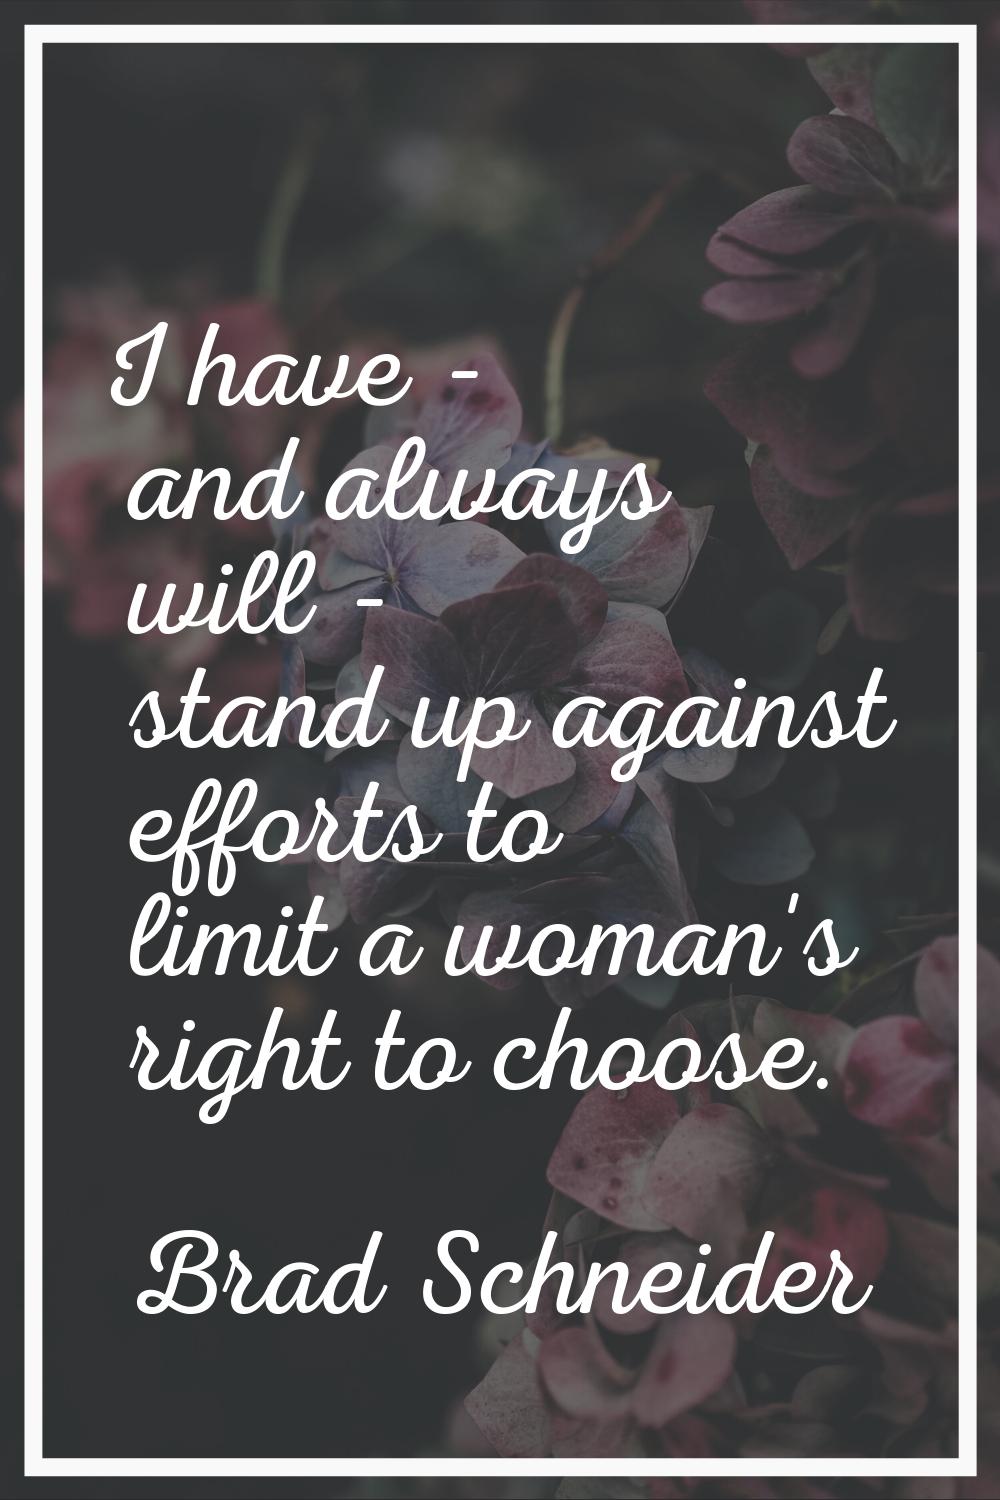 I have - and always will - stand up against efforts to limit a woman's right to choose.